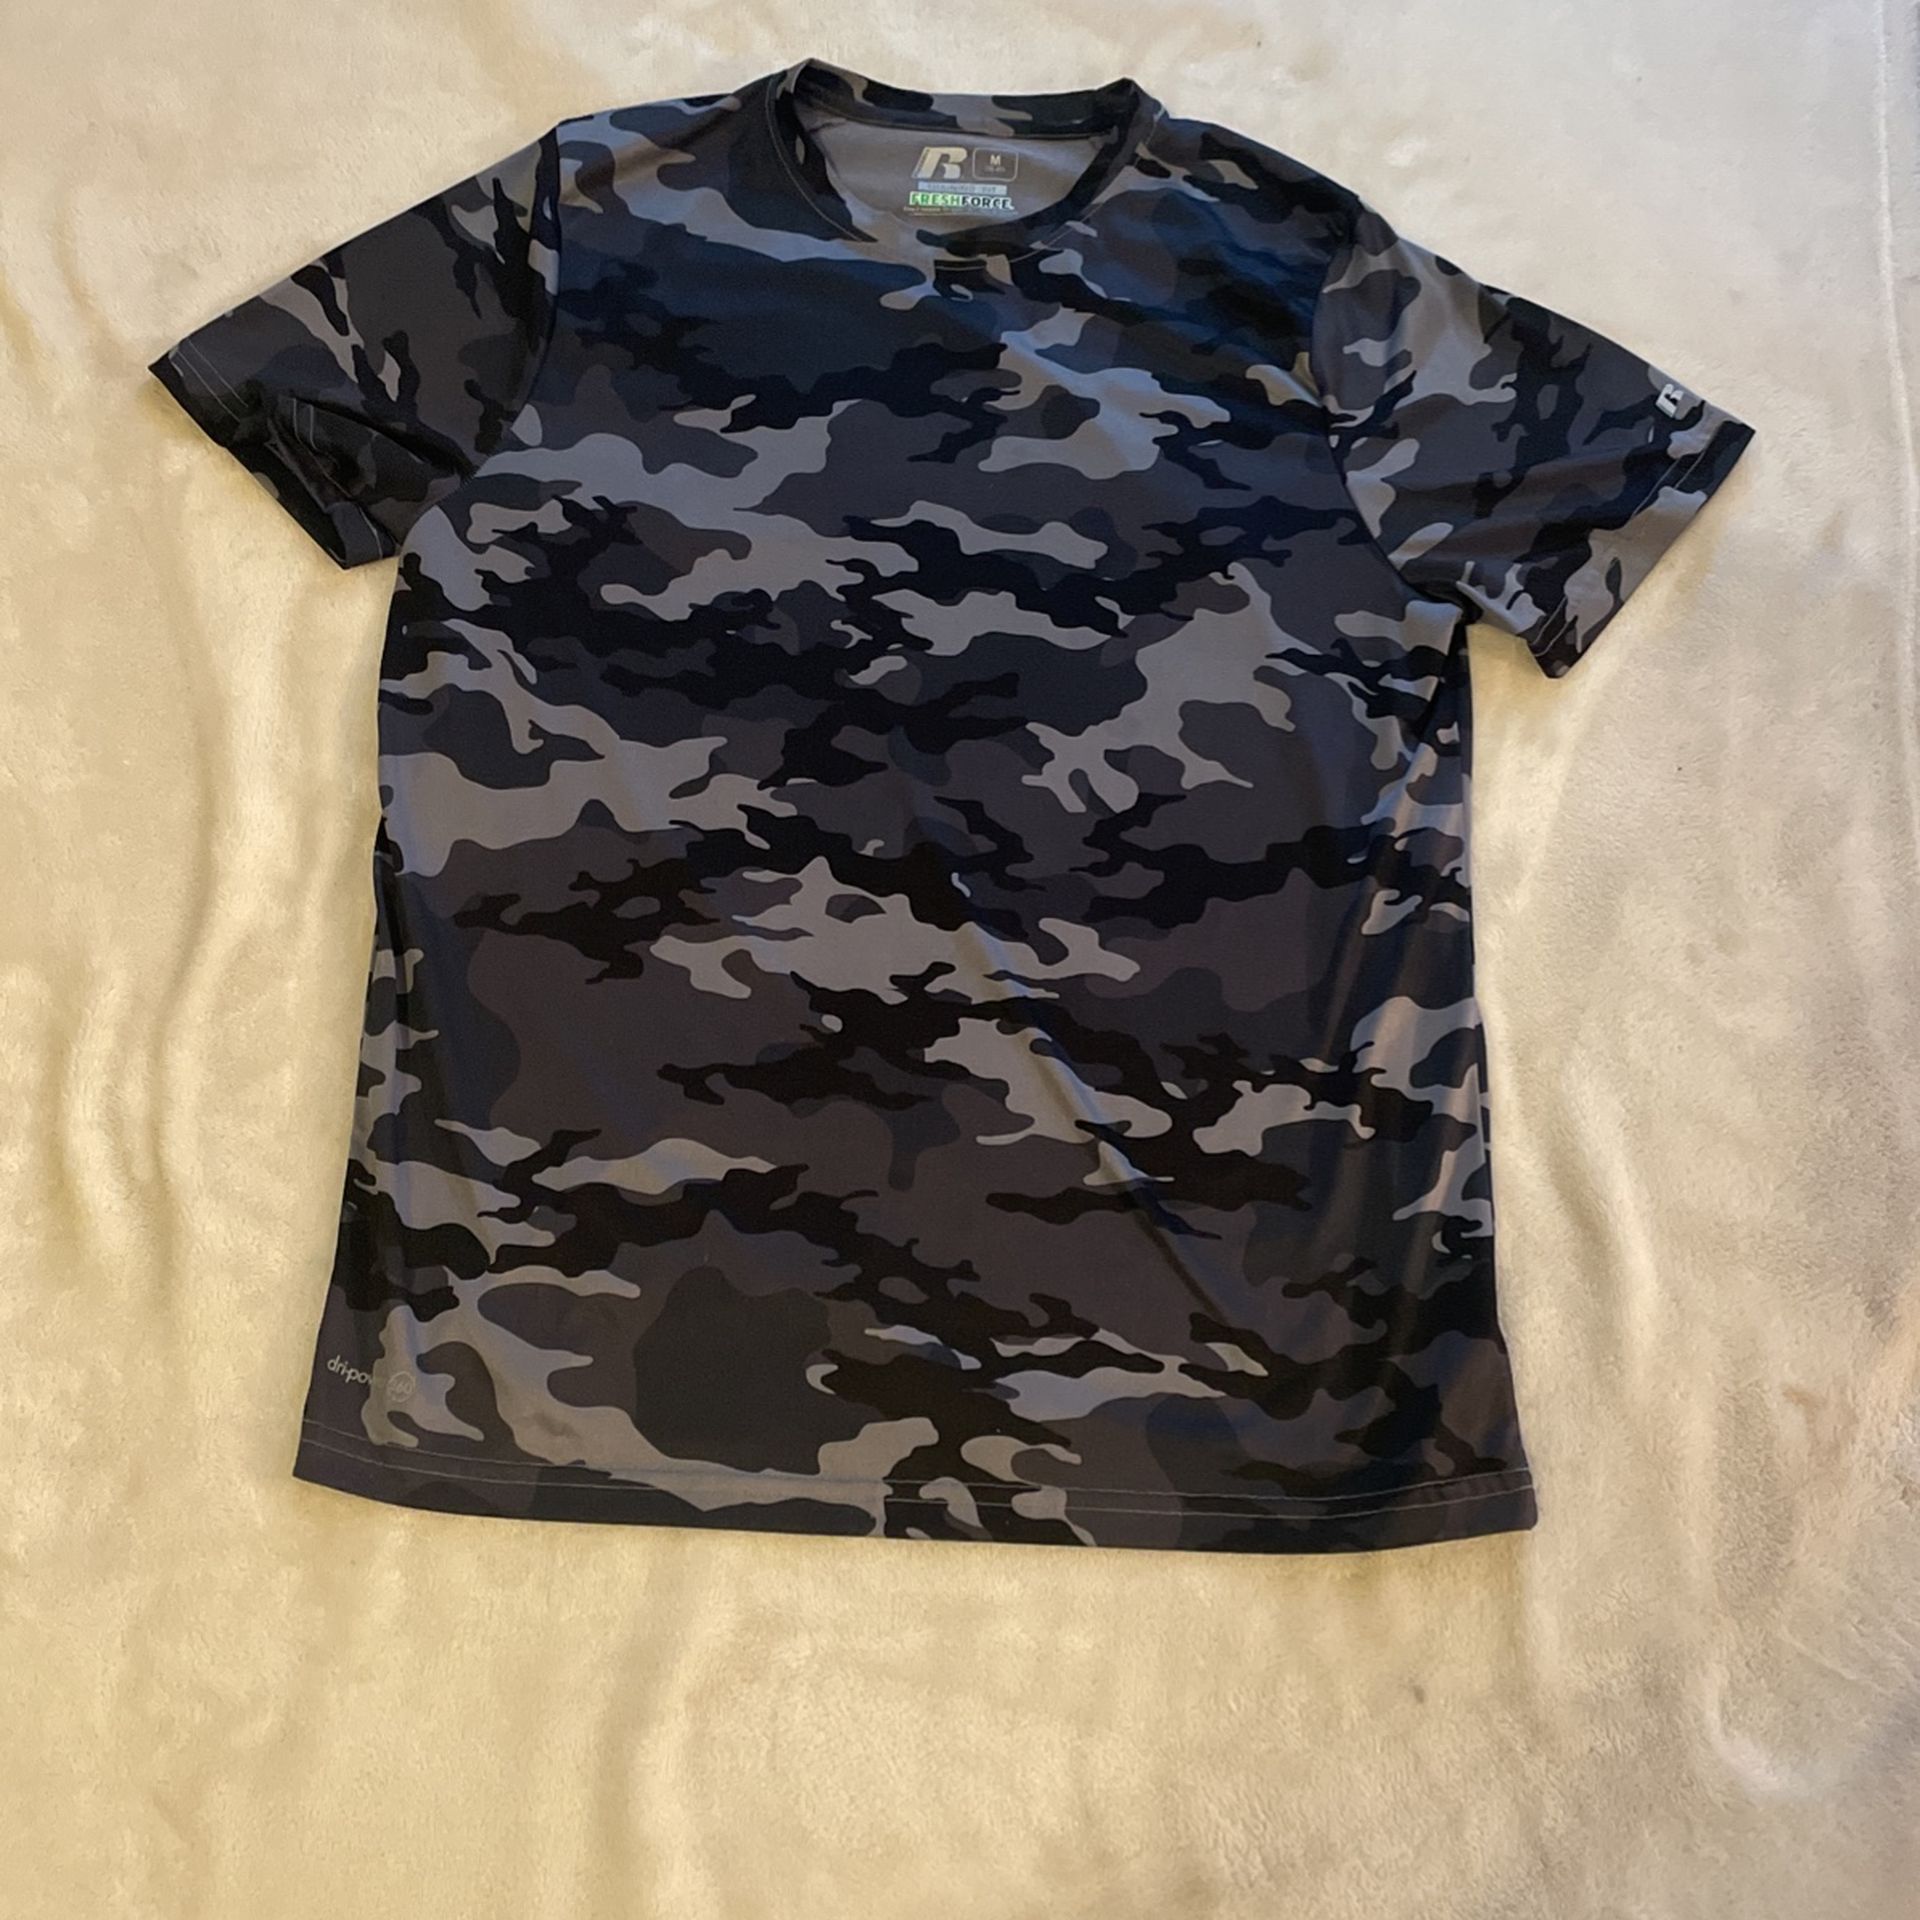 Russell Brand Camo T-Shirt Men’s Size Medium, Dry Fit Material Excellent Shape